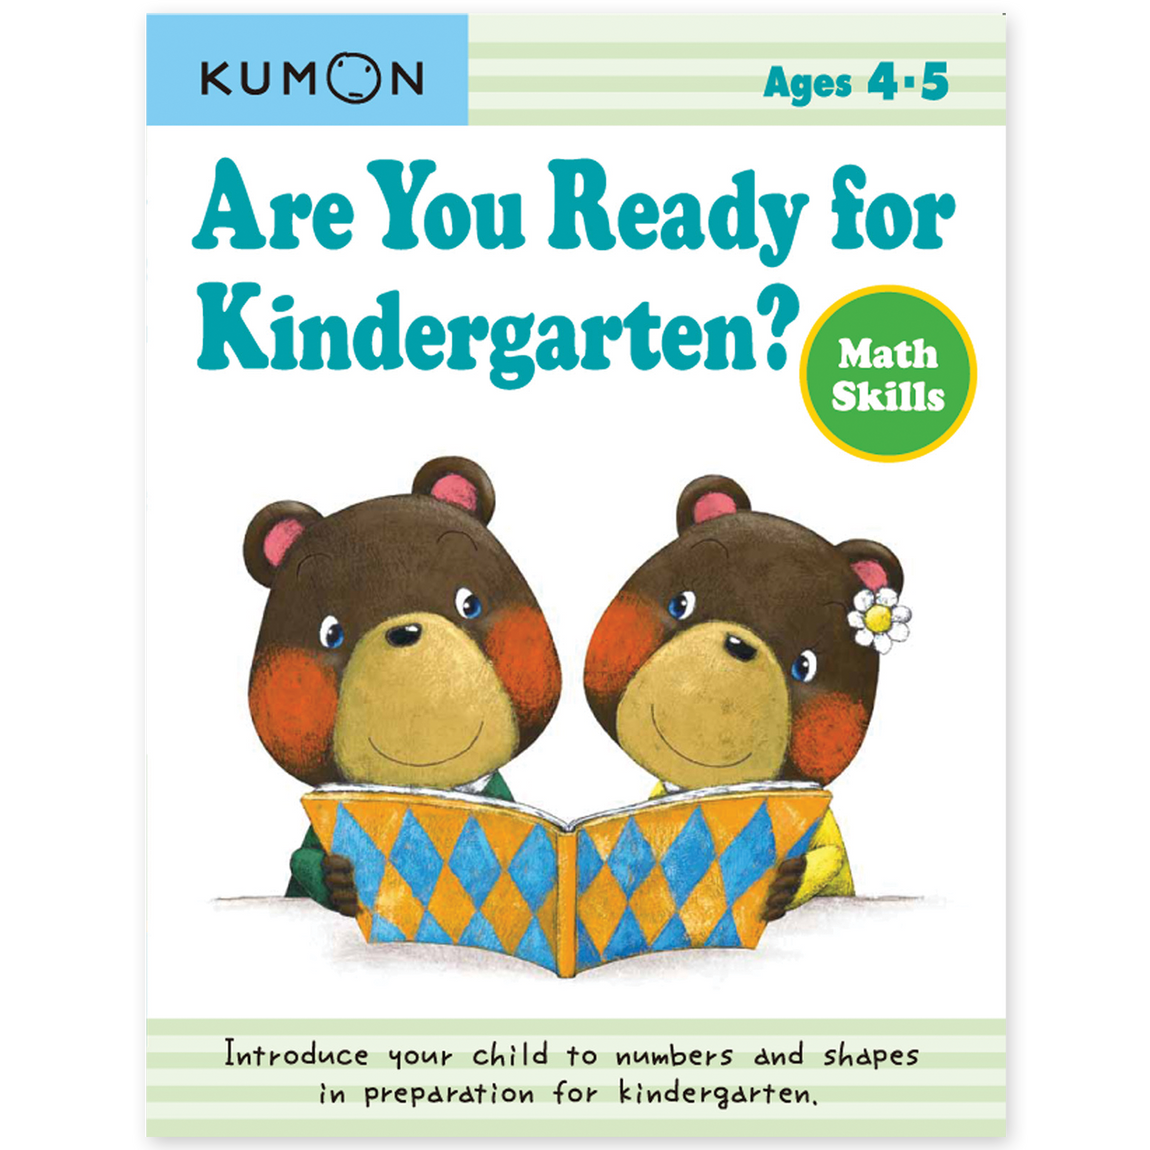 are you ready for kindergarten? math skills